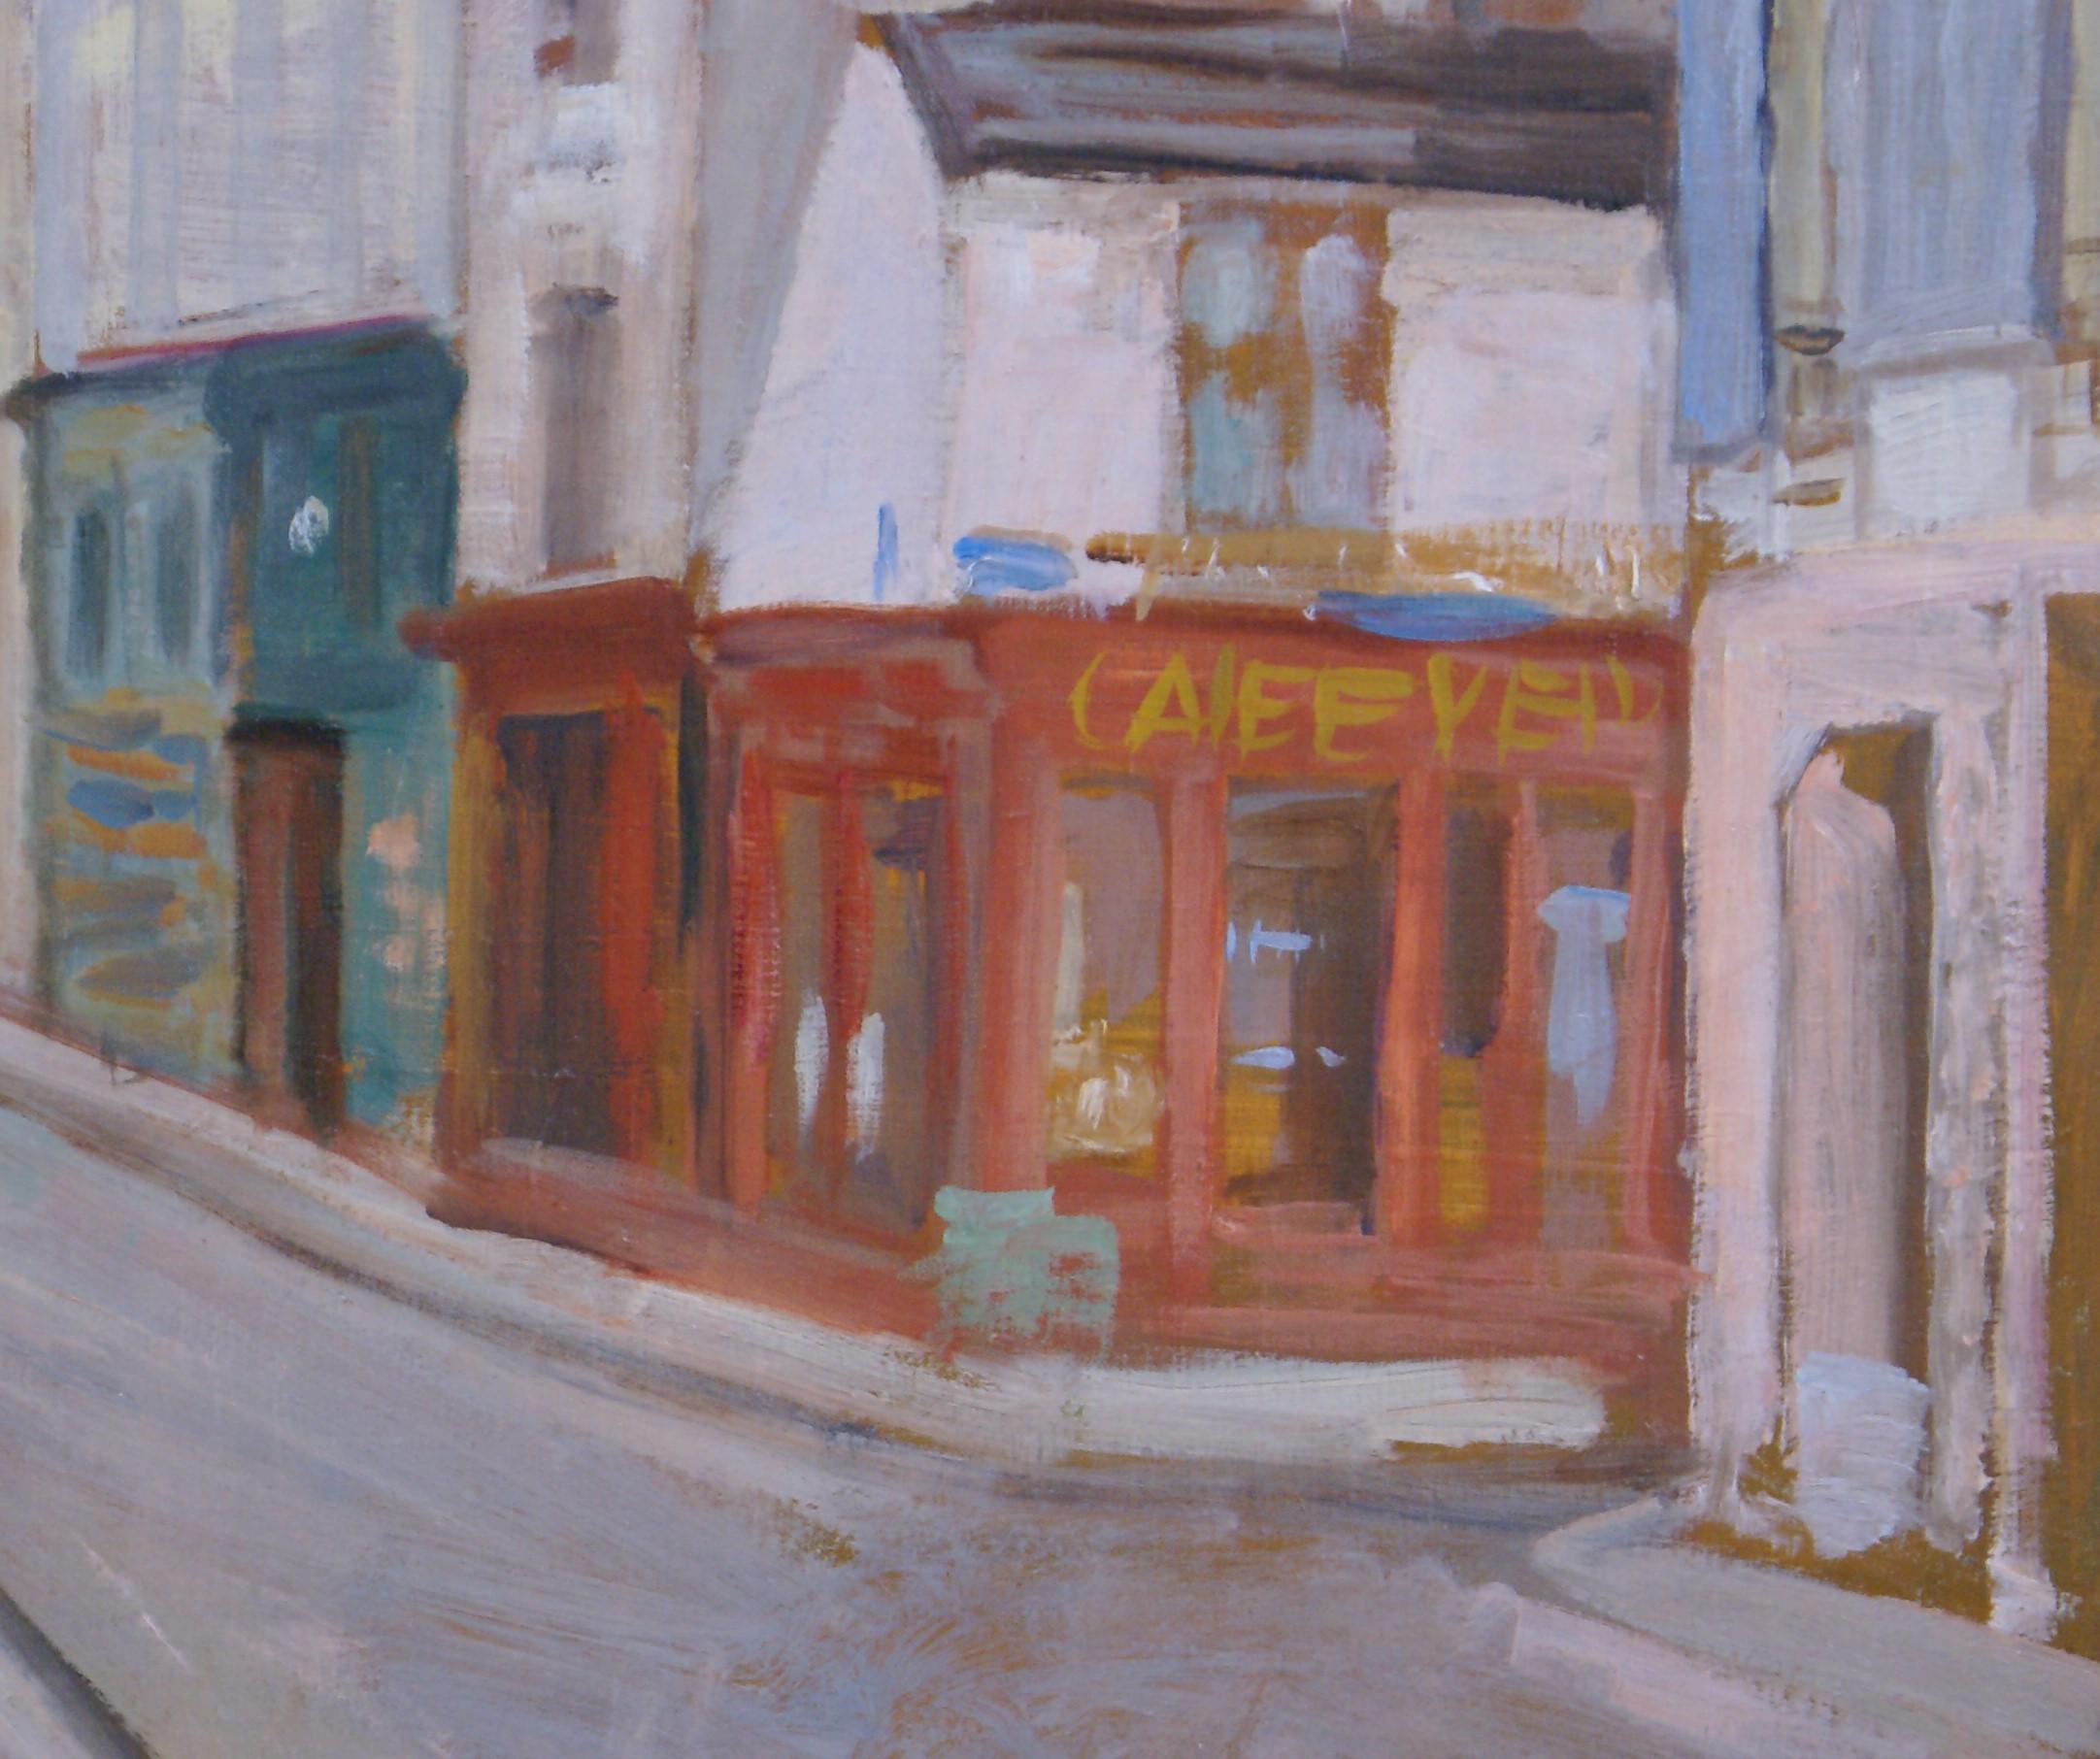 Oil on canvas of a city street scene with a red cafe. Canvas measures 31 3/4 x 25 3/4; frame dimensions measure 35 1/2 x 29 1/2 x 1 1/4. Housed in a chestnut- colored wooden frame with gold-tone beading.